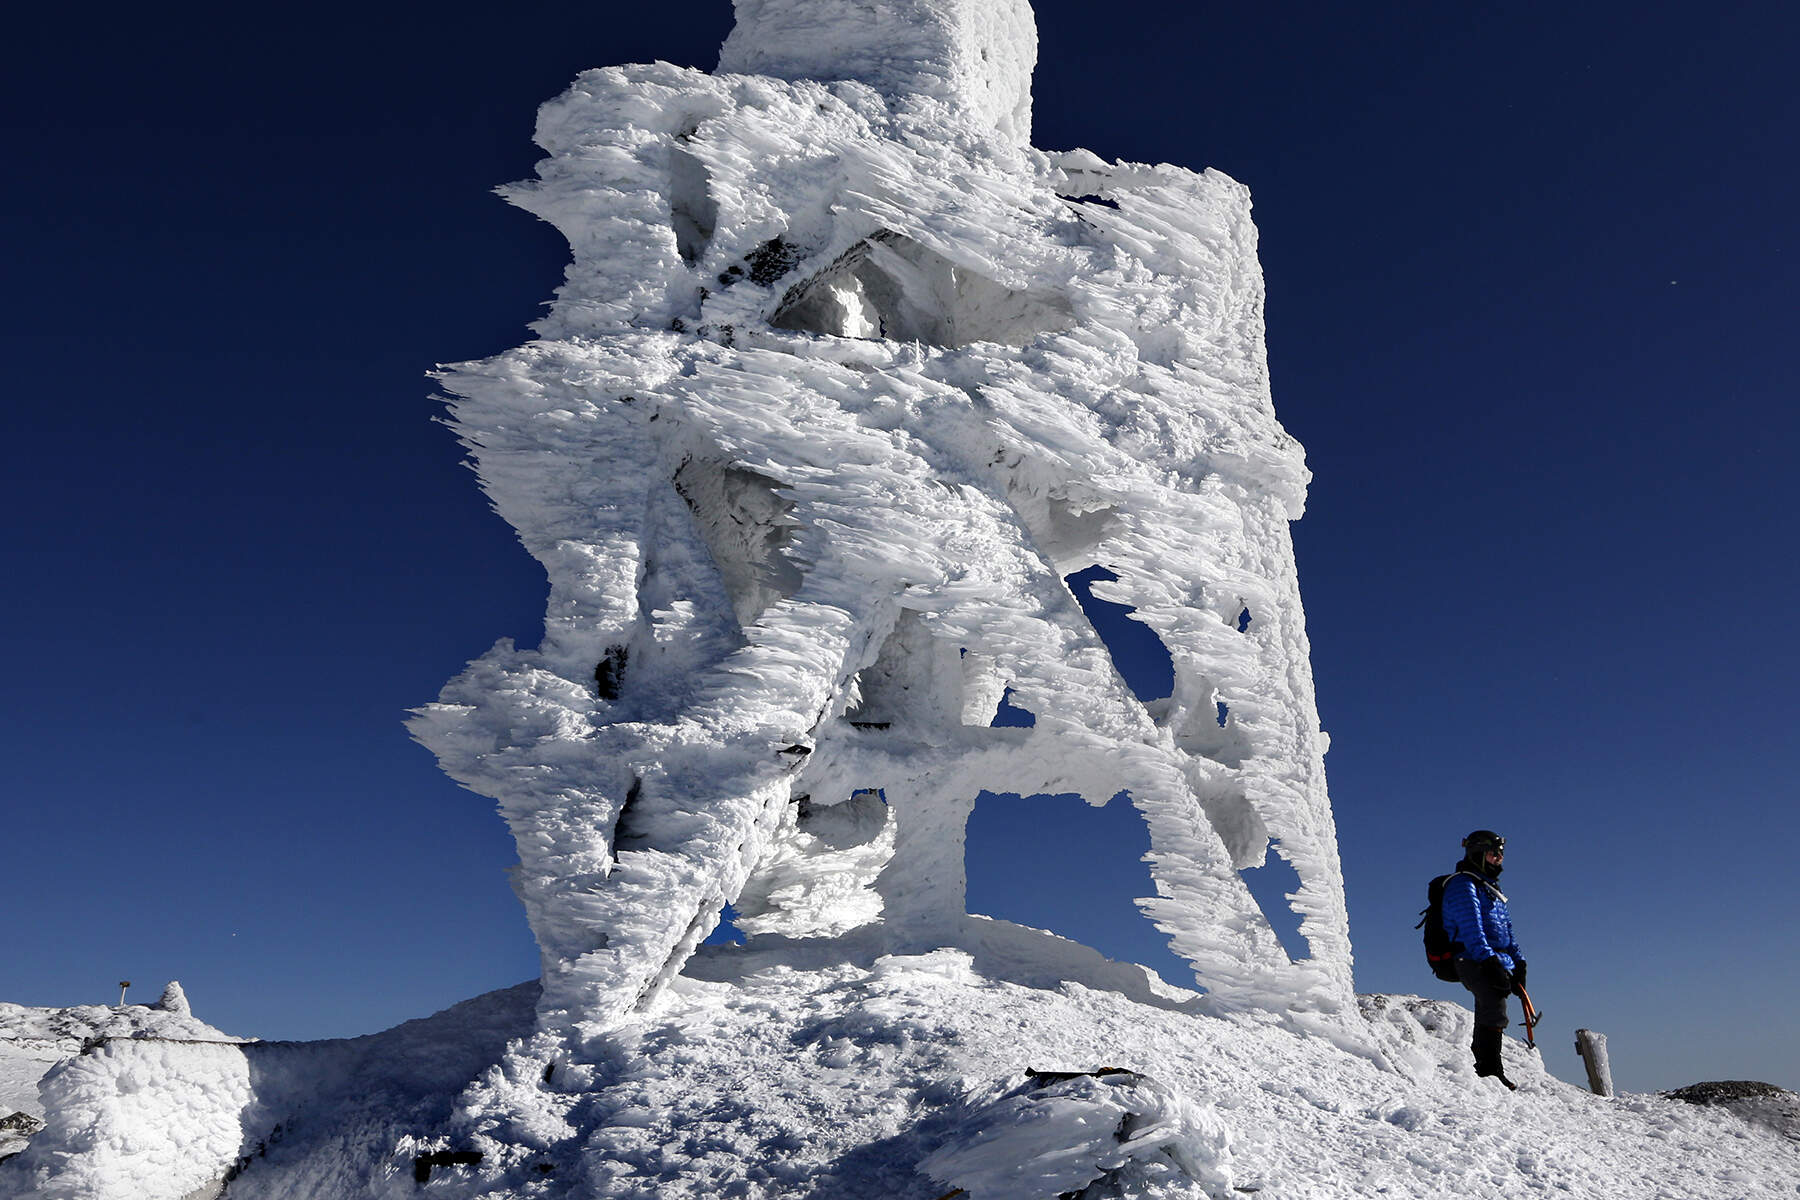 Douglas Ciampi of Westminster, Mass., stands next to a rime ice-covered antenna while taking in the view from the summit of Mount Washington, N.H., Sunday, Feb. 23, 2020. Rime ice forms when supercooled moisture hits a solid surface. Ciampi's 5-hour hike was rewarded by exceptionally clear conditions allowing for a visibility of 100 miles from the northeast's highest peak. (Robert F. Bukaty/AP)